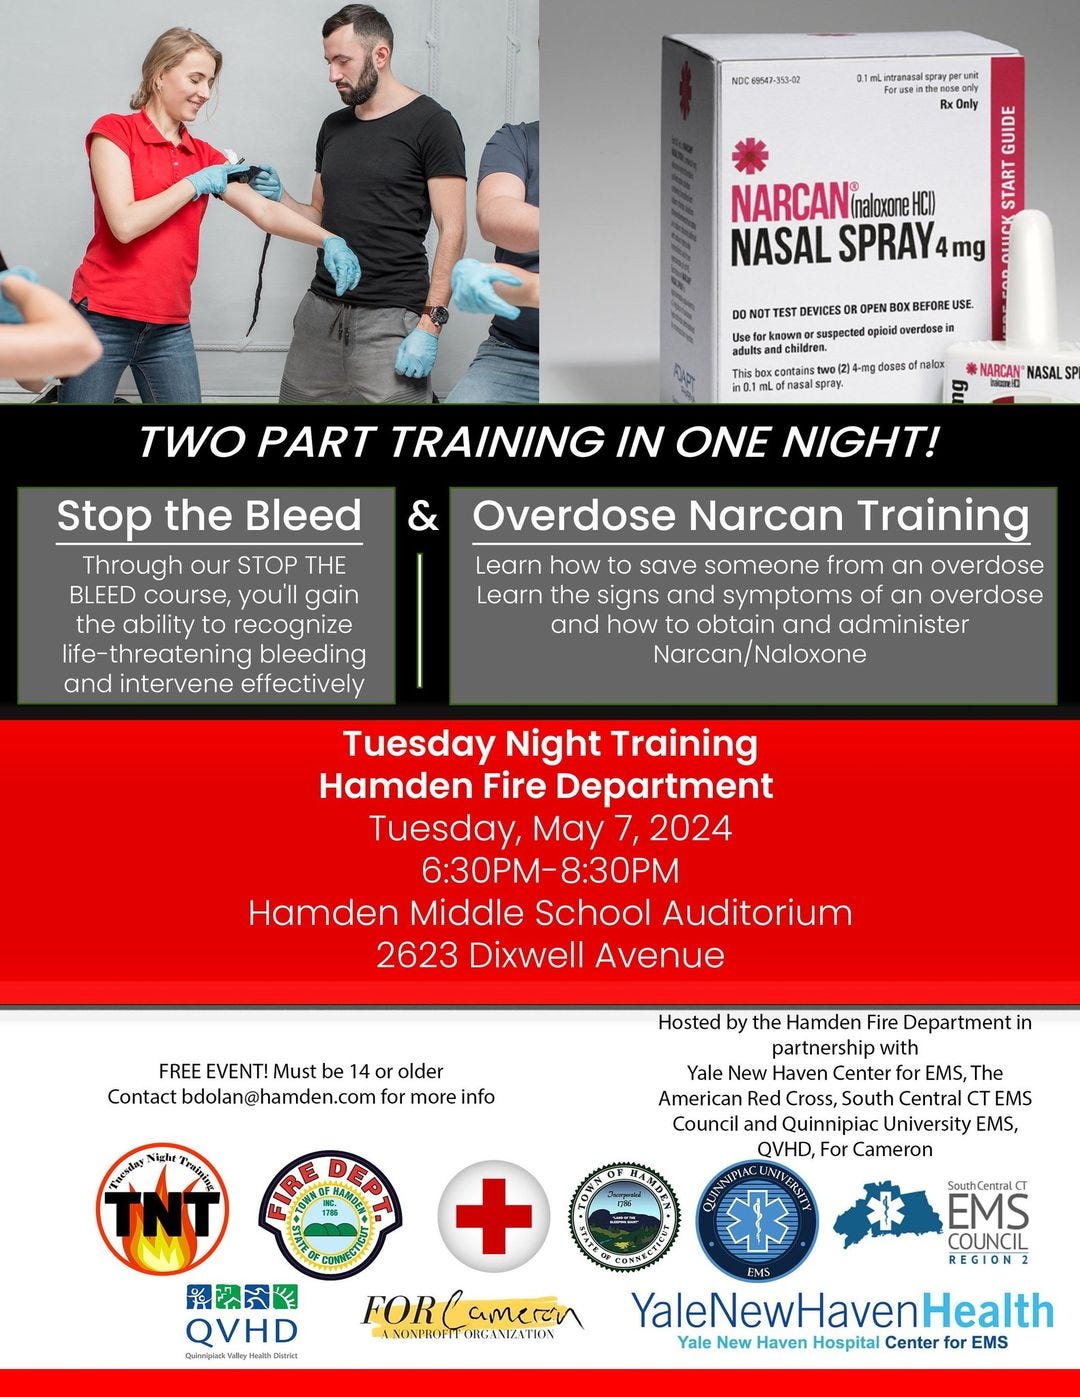 May be an image of 4 people and text that says 'NARCANinalt NASAL SPRAY4mg PART TRAINING IN ONE NIGHT! Stop the Bleed Through our STOP THE BLEED course, you'll gain the ability recognize threatening bleeding and intervene effectively Overdose Narcan Training Learn how save someone from an overdose signs and symptoms overdose na obtain and administer Narcan/Naloxone Tuesday Night Training Hamden Fire Department May 2024 6:30M- 8:30 Hamden Middle School Auditorium 2623 Dixwell Avenue FREE EVENT! Contact bdolan@hamden.comfc Hosted info Hamden Fire Departmentin partnership Yale New Haven Center EMS, The American South Central EMS Council and EMS, Cameron 幽菌四图 QVHD t So.thCencalCT FOR MUMINOAFONCONEAYON COUNCIL REGION YaleNewHavenHealth Yale Hospital EMS'